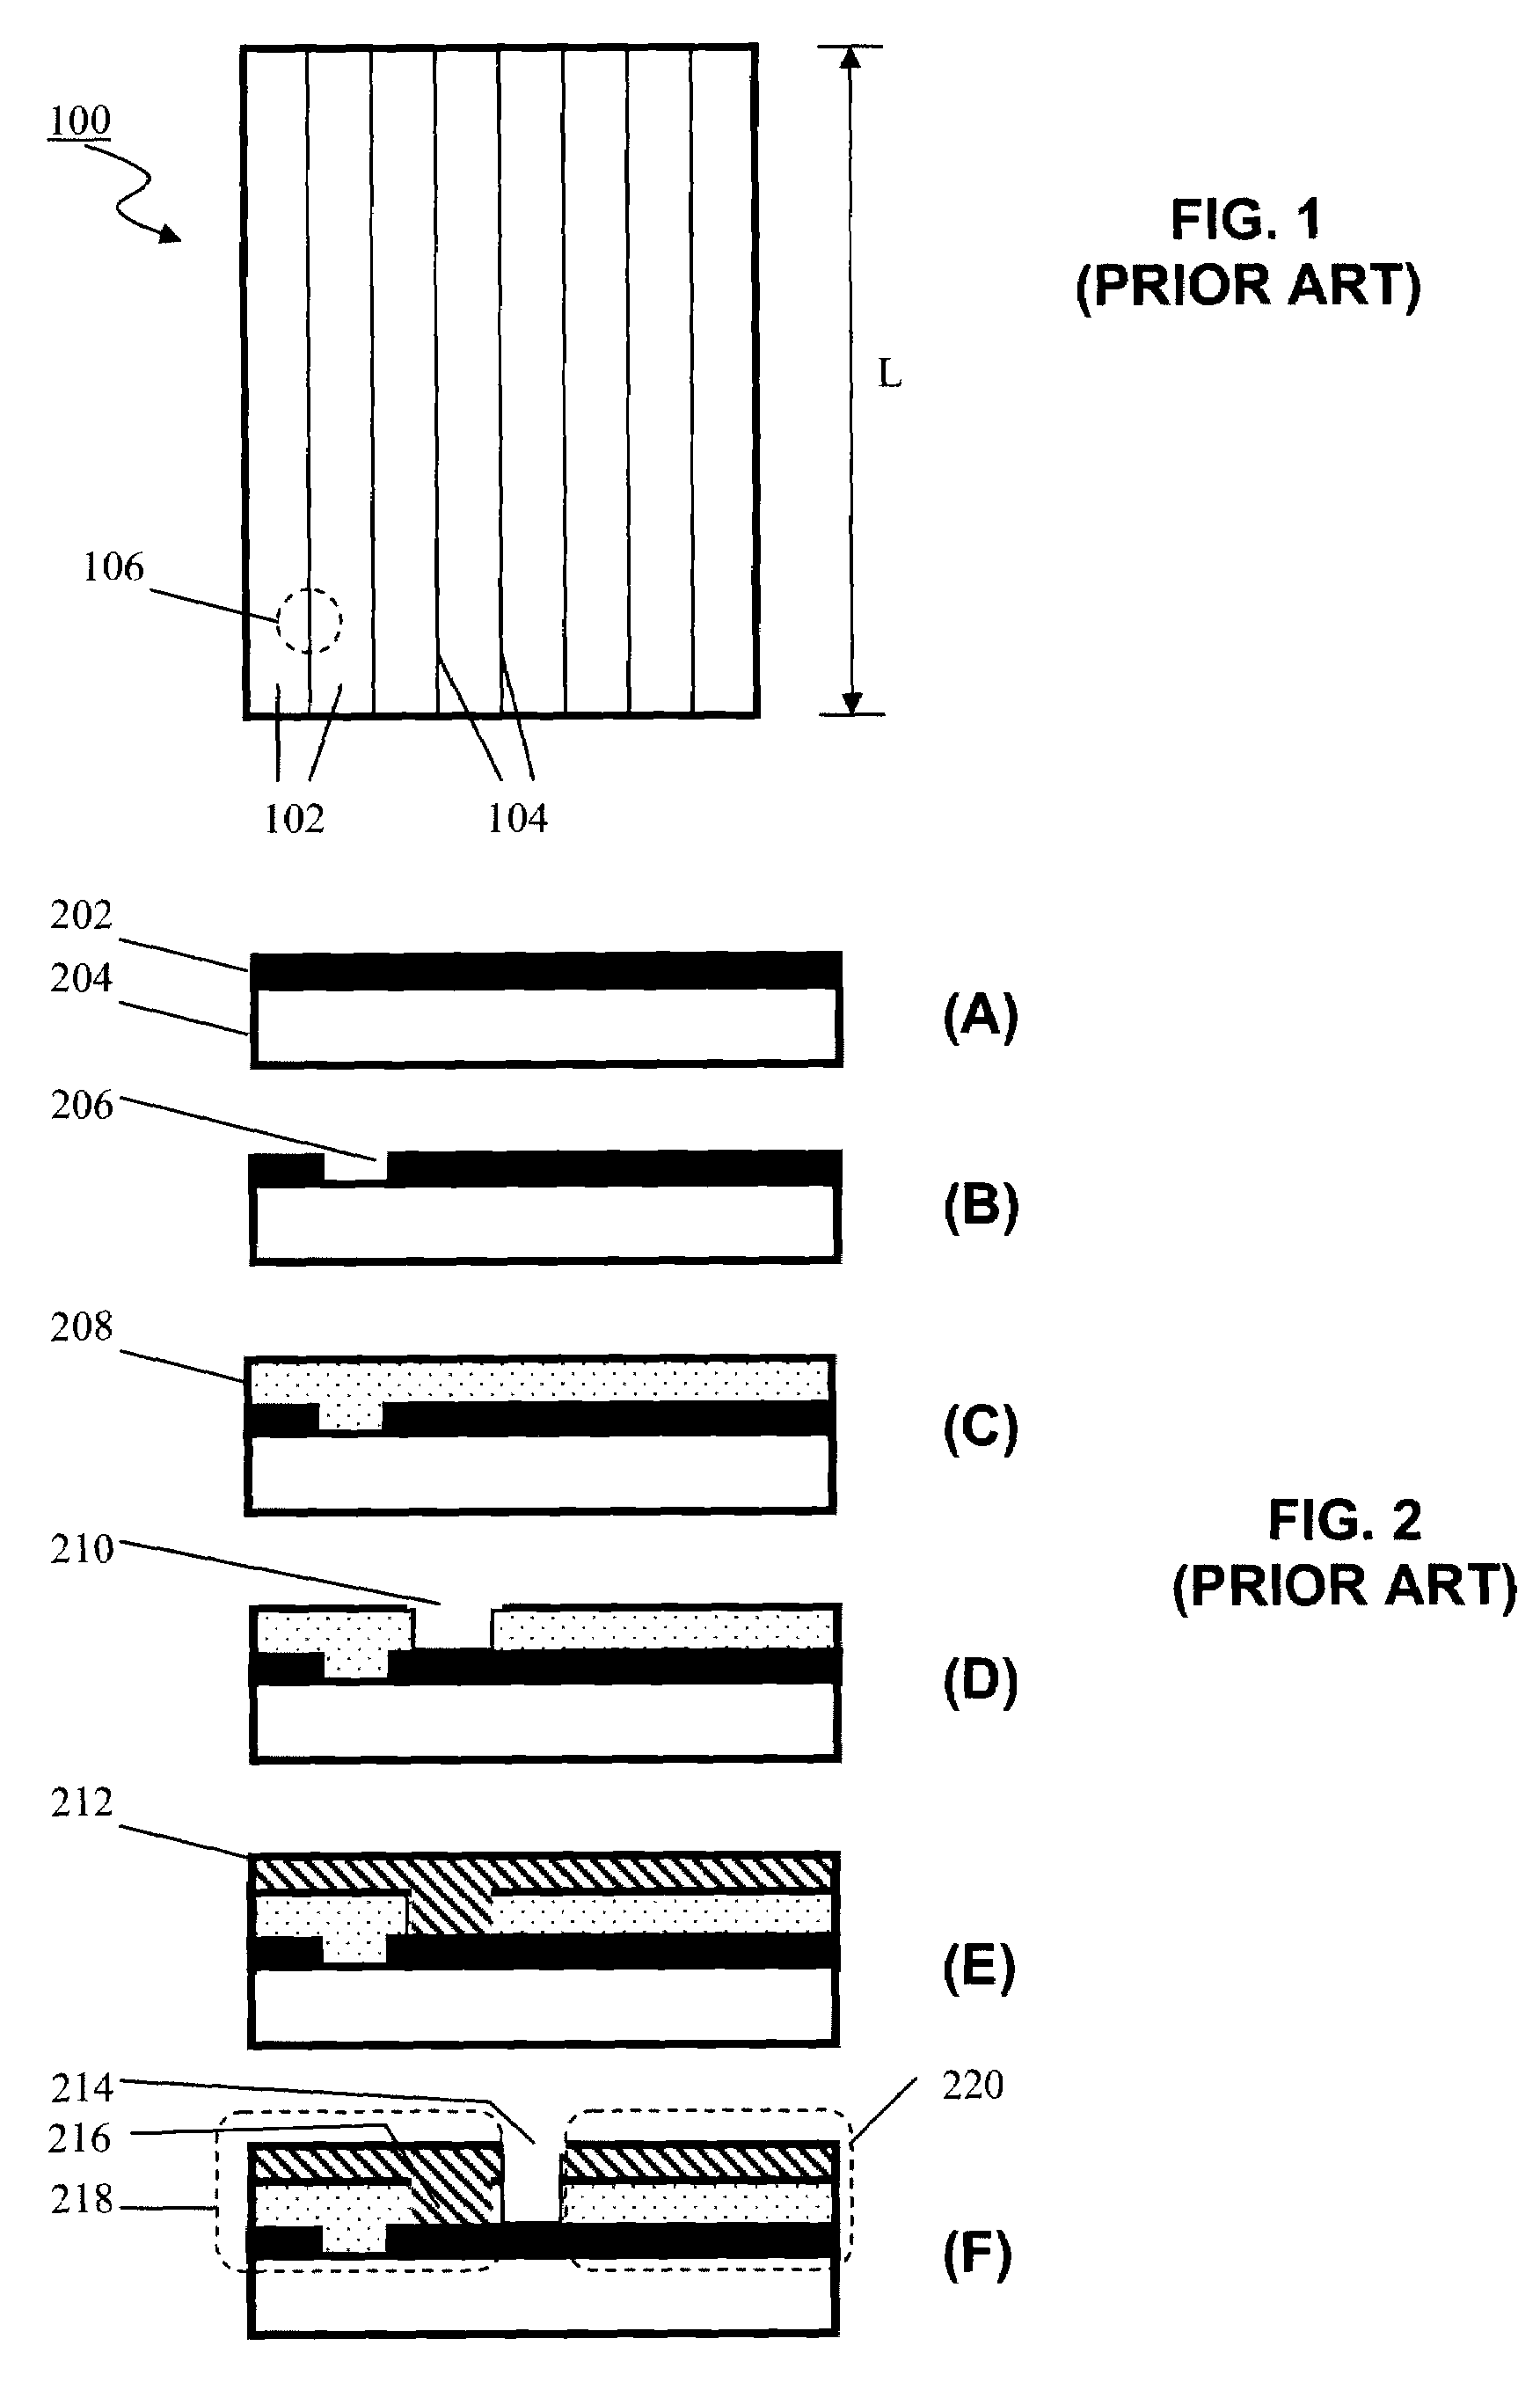 Module having an improved thin film solar cell interconnect